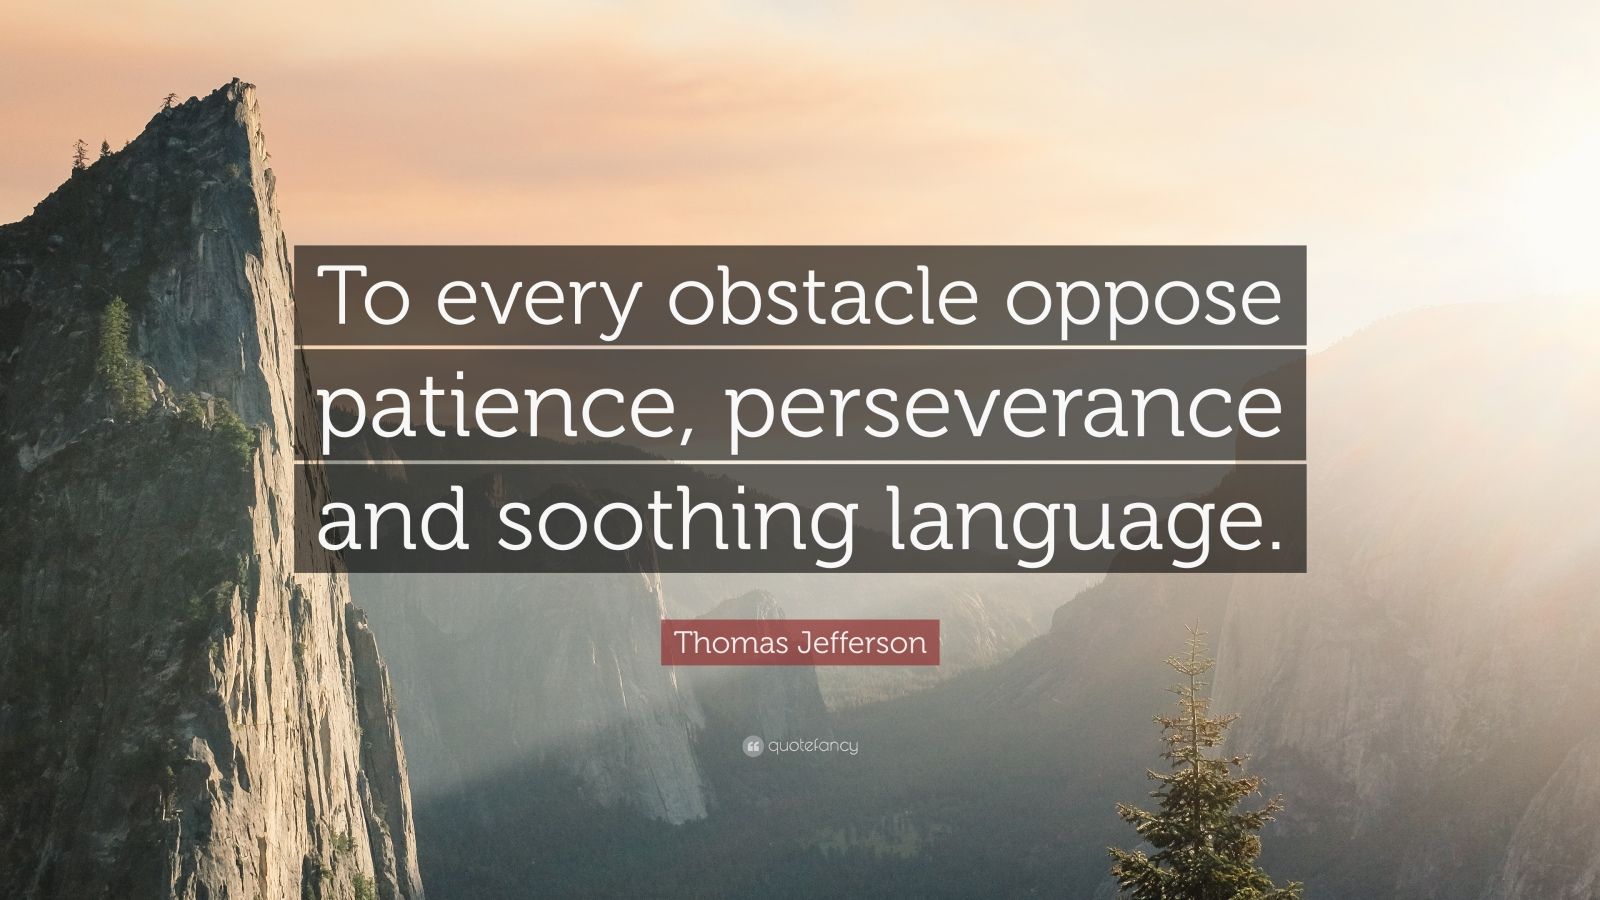 Thomas Jefferson Quote: “To every obstacle oppose patience ...